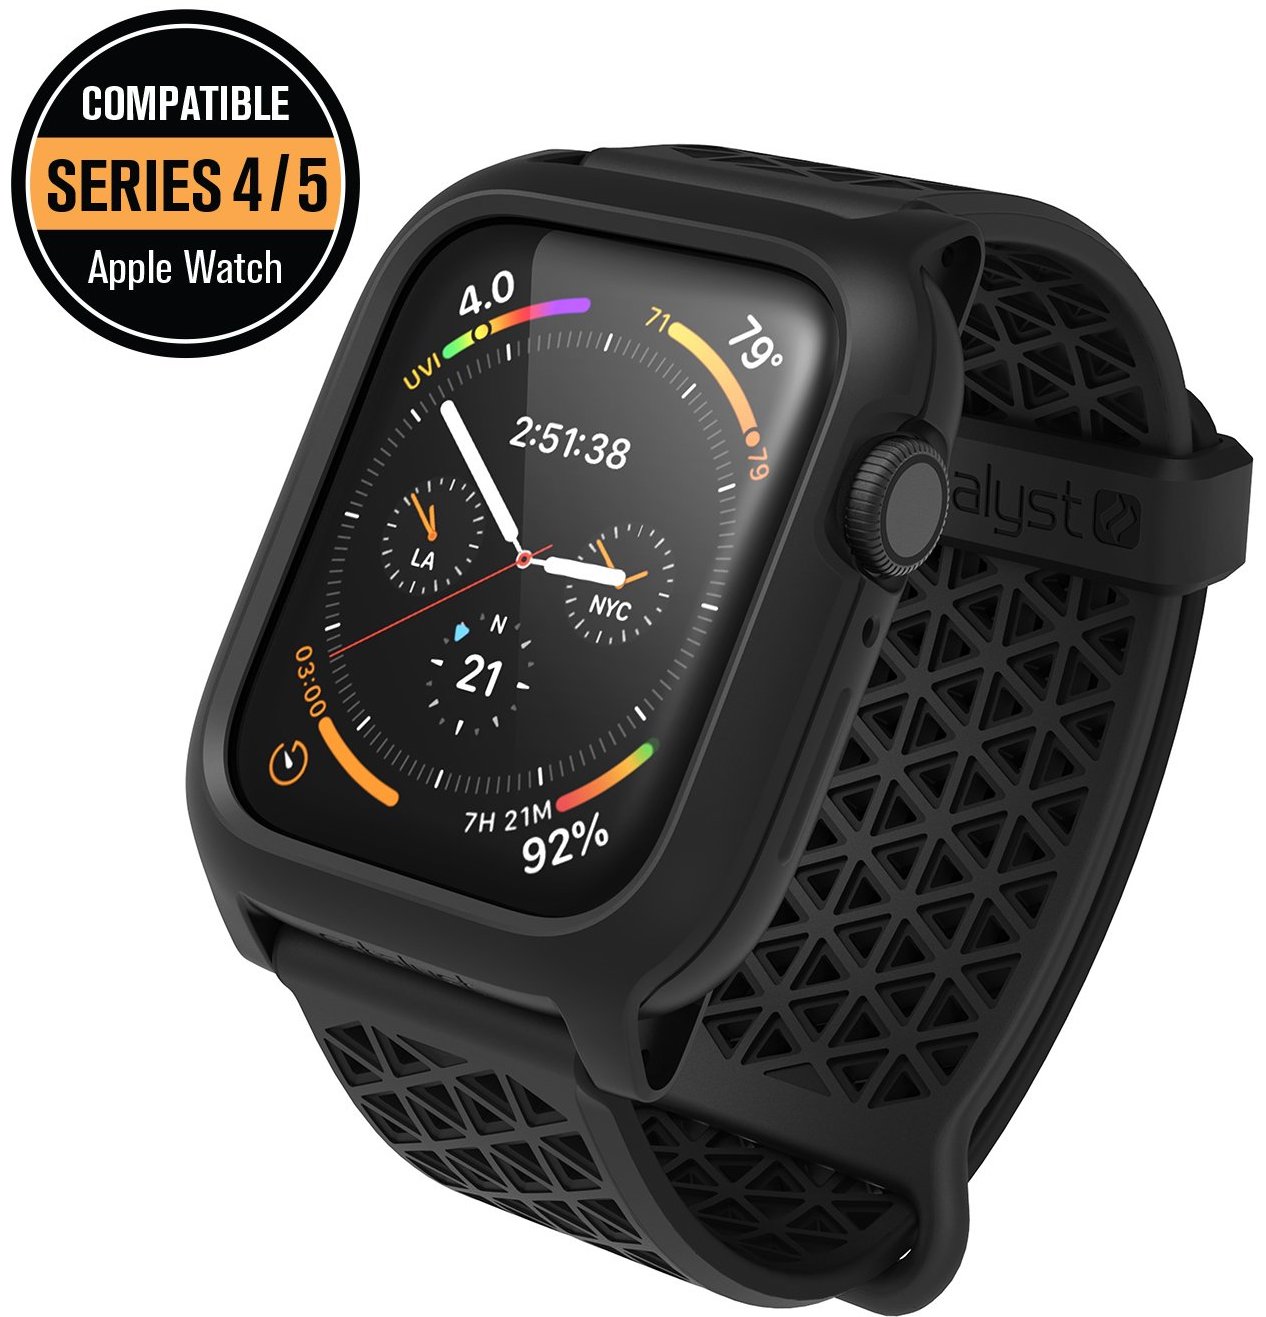 Catalyst Impact Case for Apple Watch Series 4/5